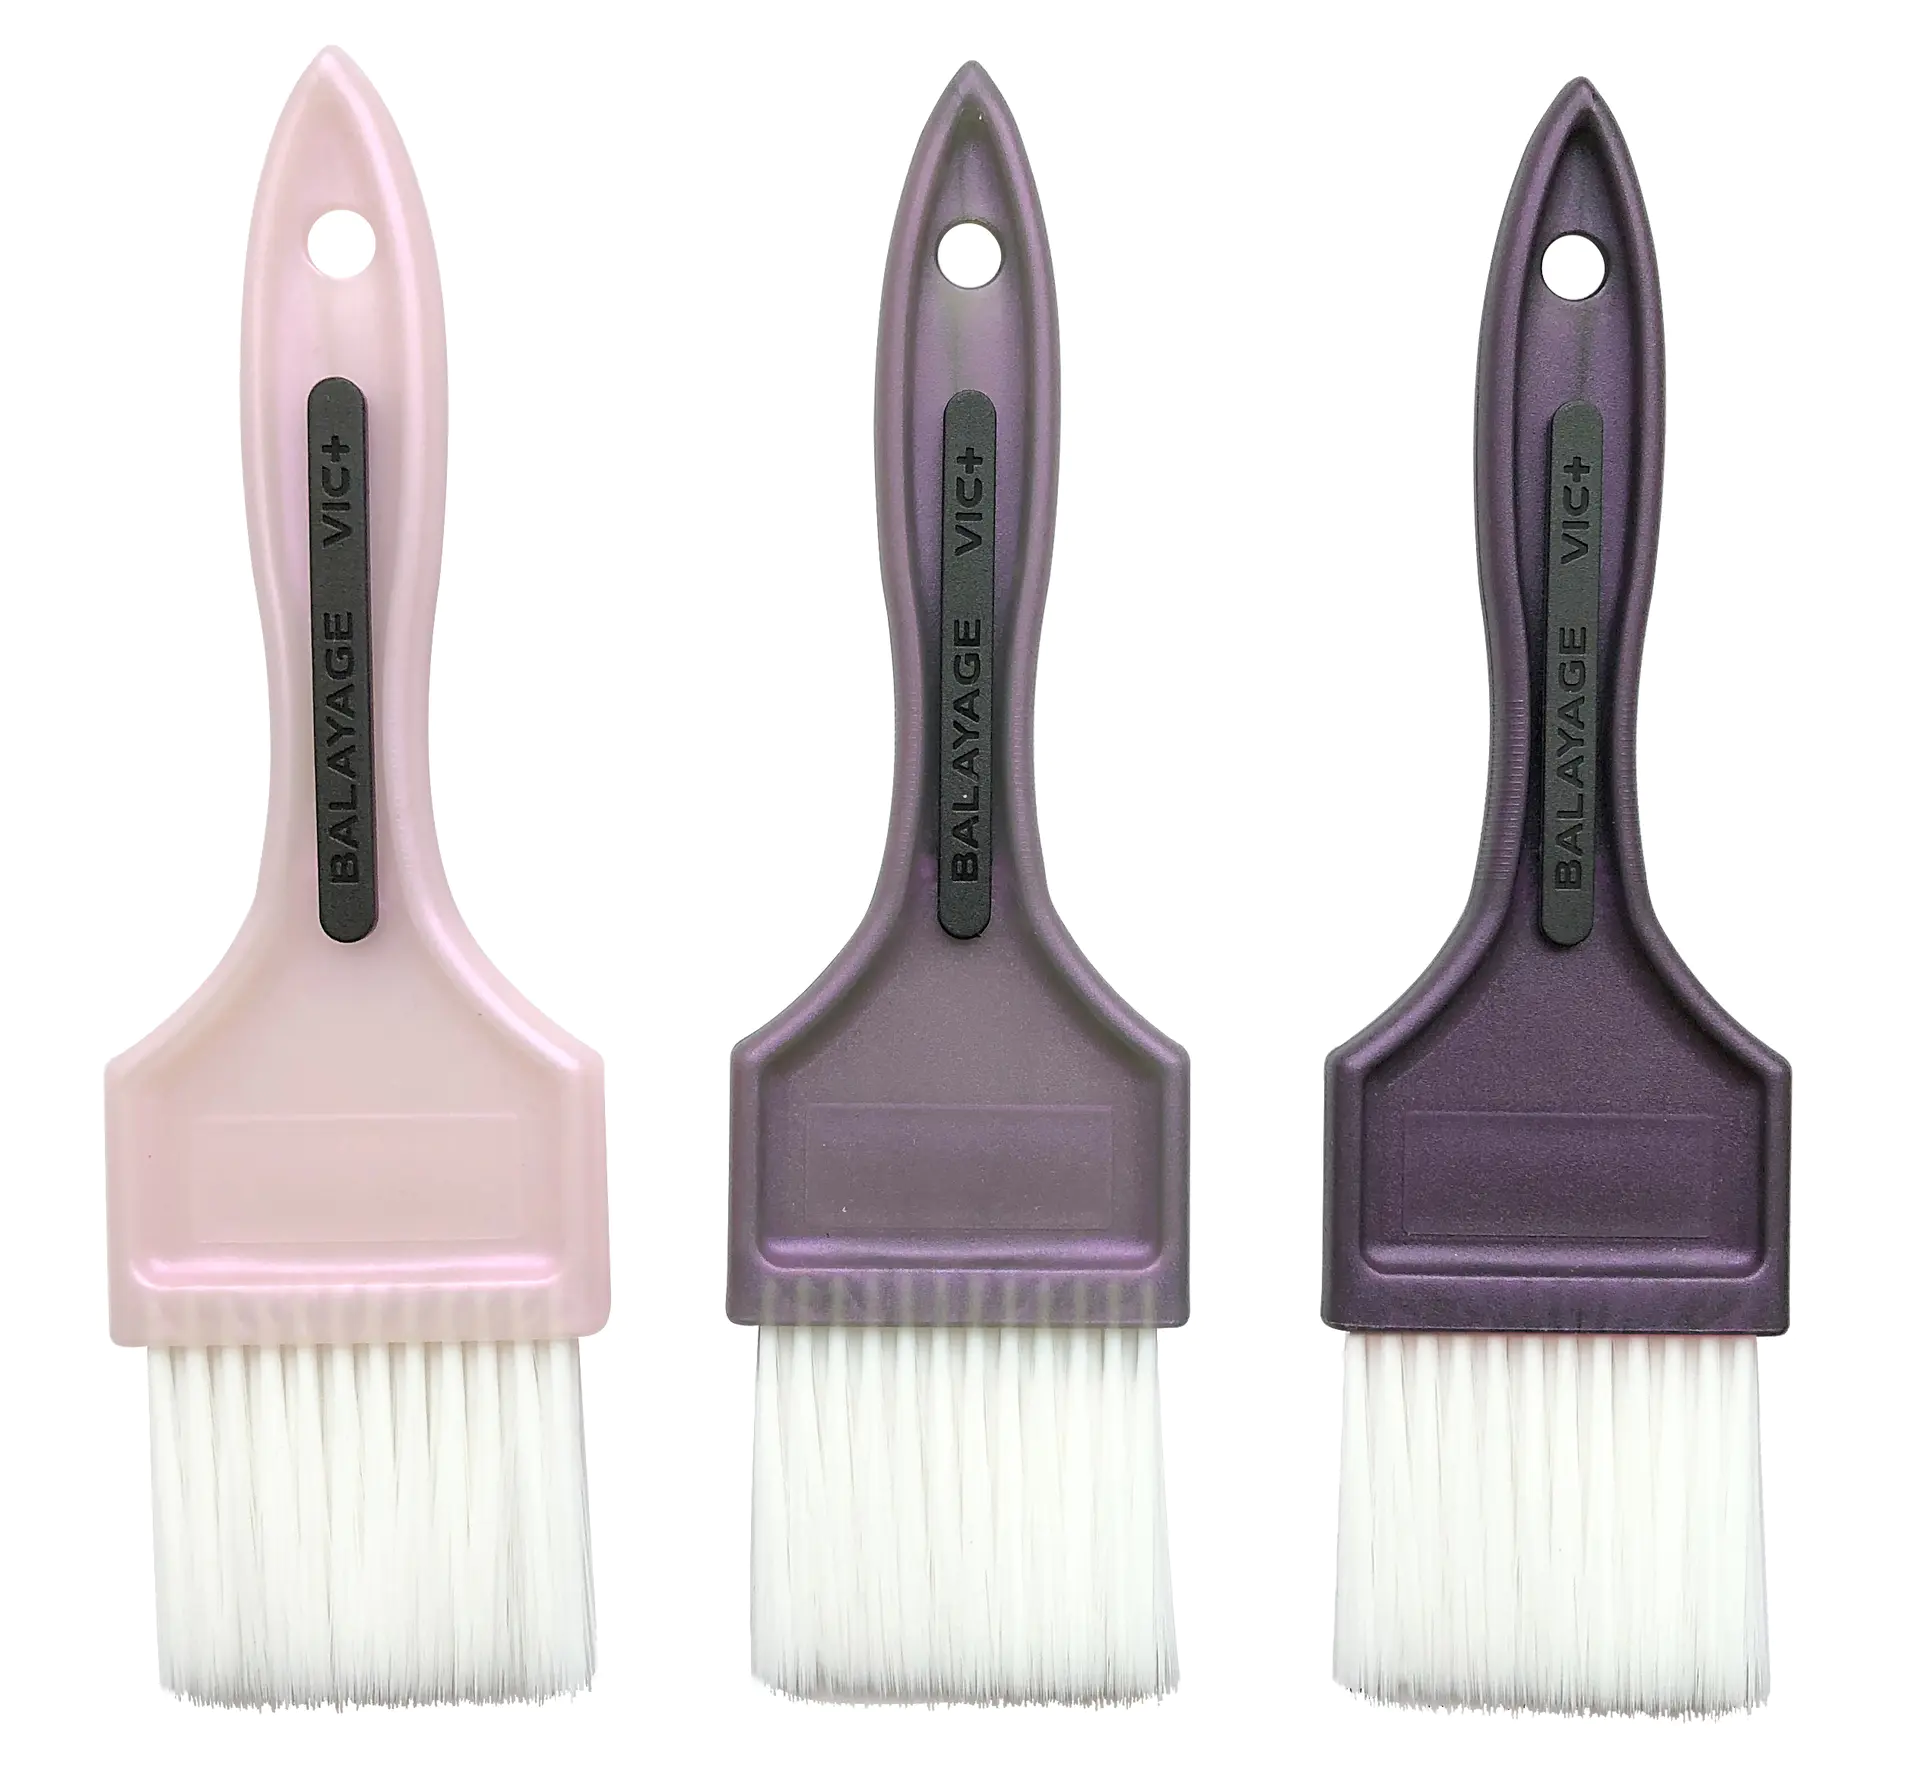 Hair Dye Brush Hair Coloring Brush Hair Tint Brushes for Salon and Home Use